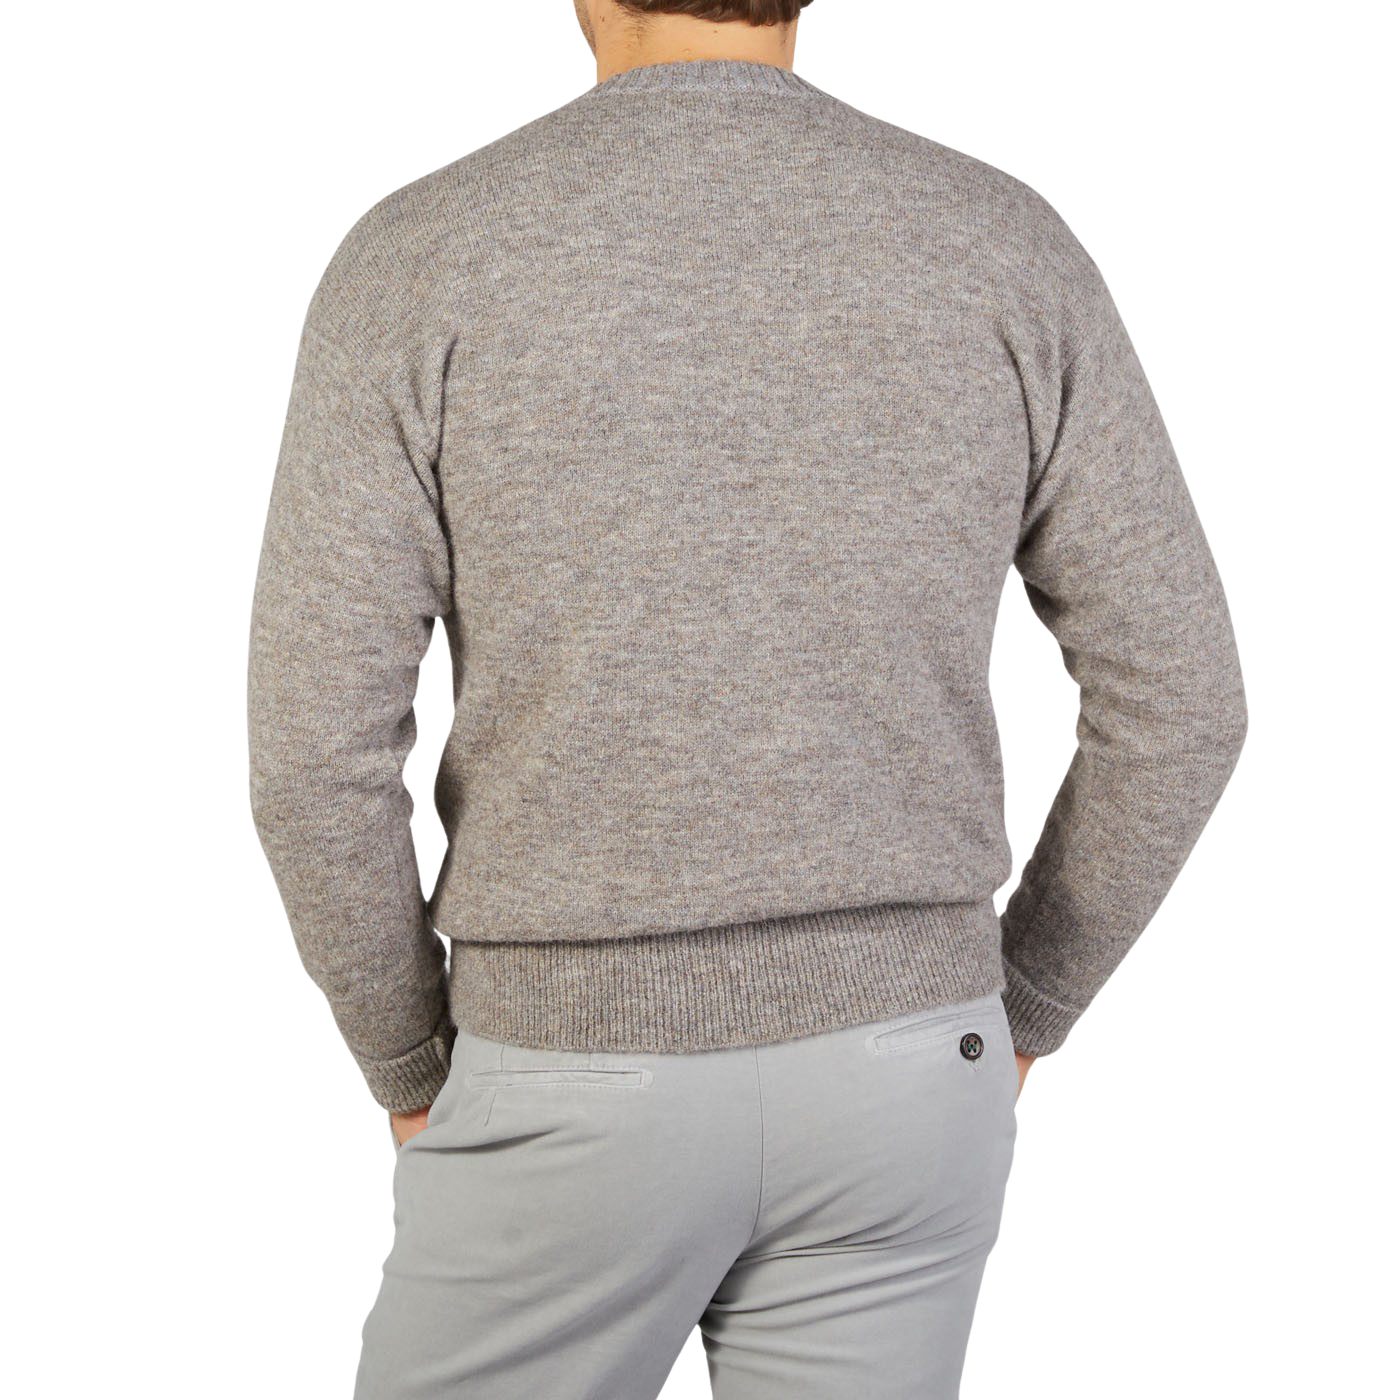 The back view of a man wearing an Altea Grey Melange Wool Alpaca Crewneck Sweater and gray pants.